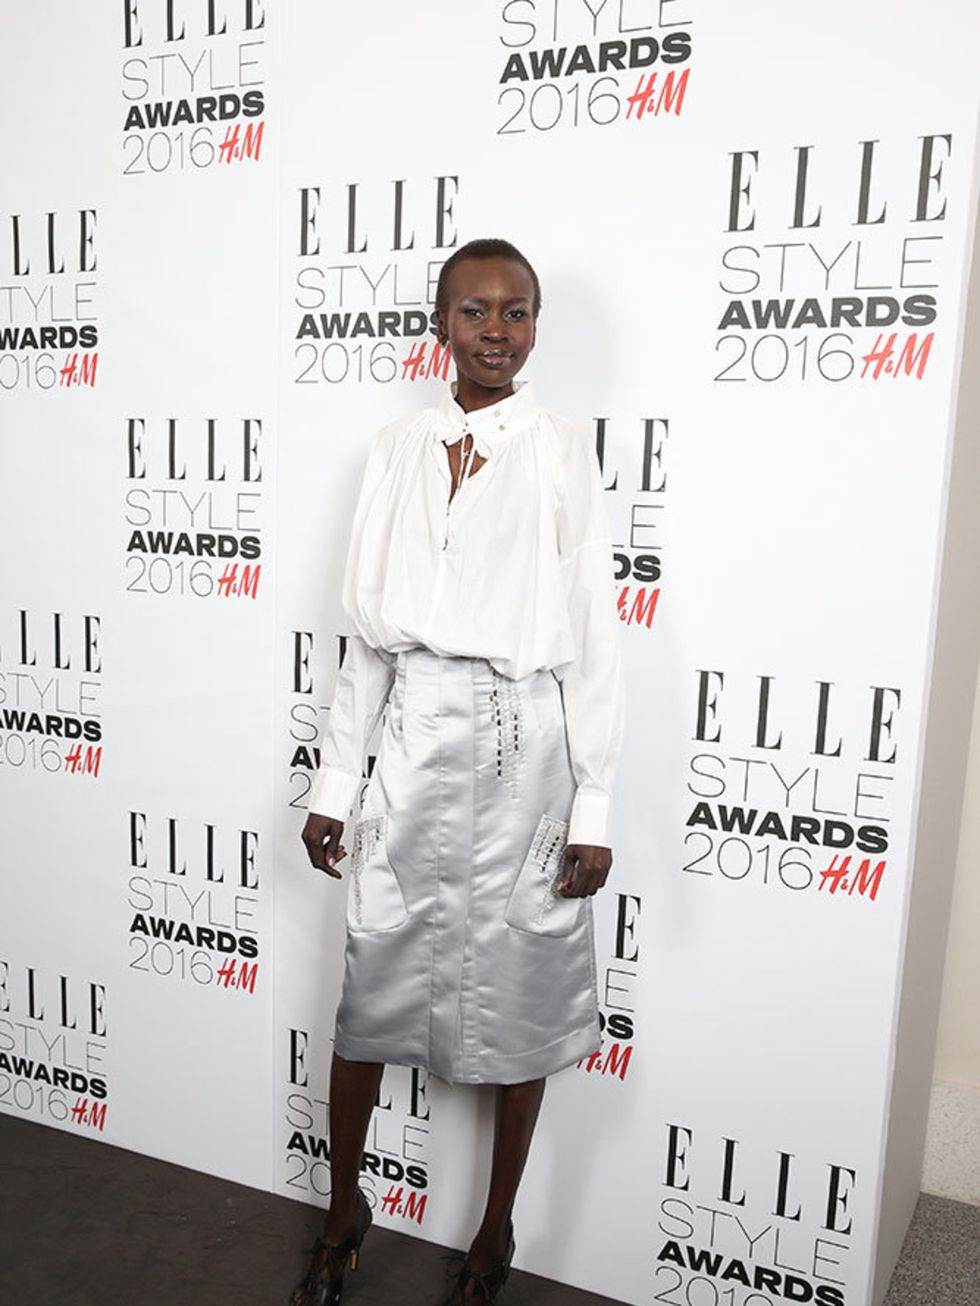 Alek Wek wearing H&M at the ELLE Style Awards 2016 in London, February 2016